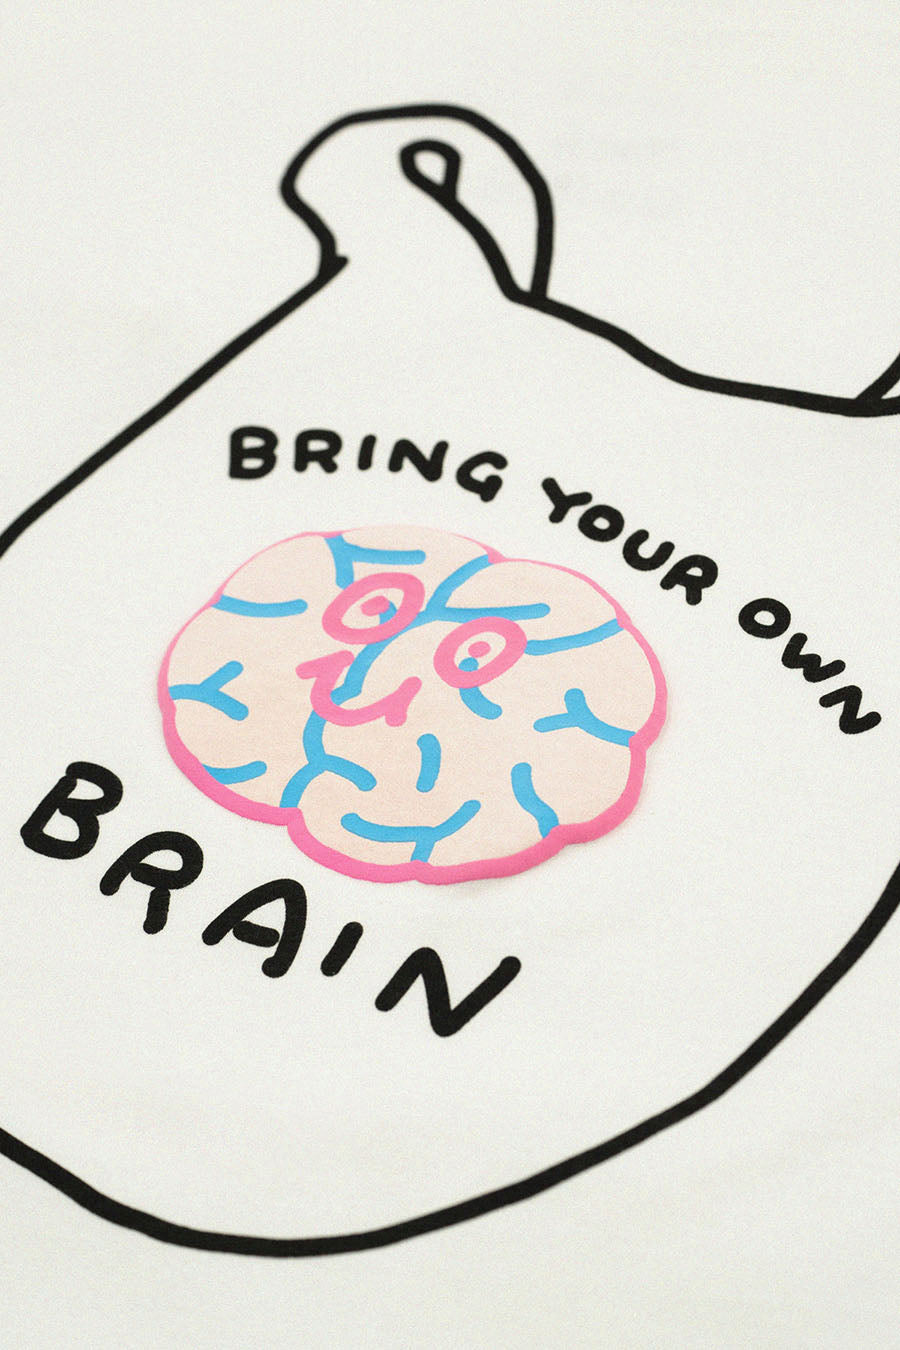 BRING YOUR OWN BRAIN